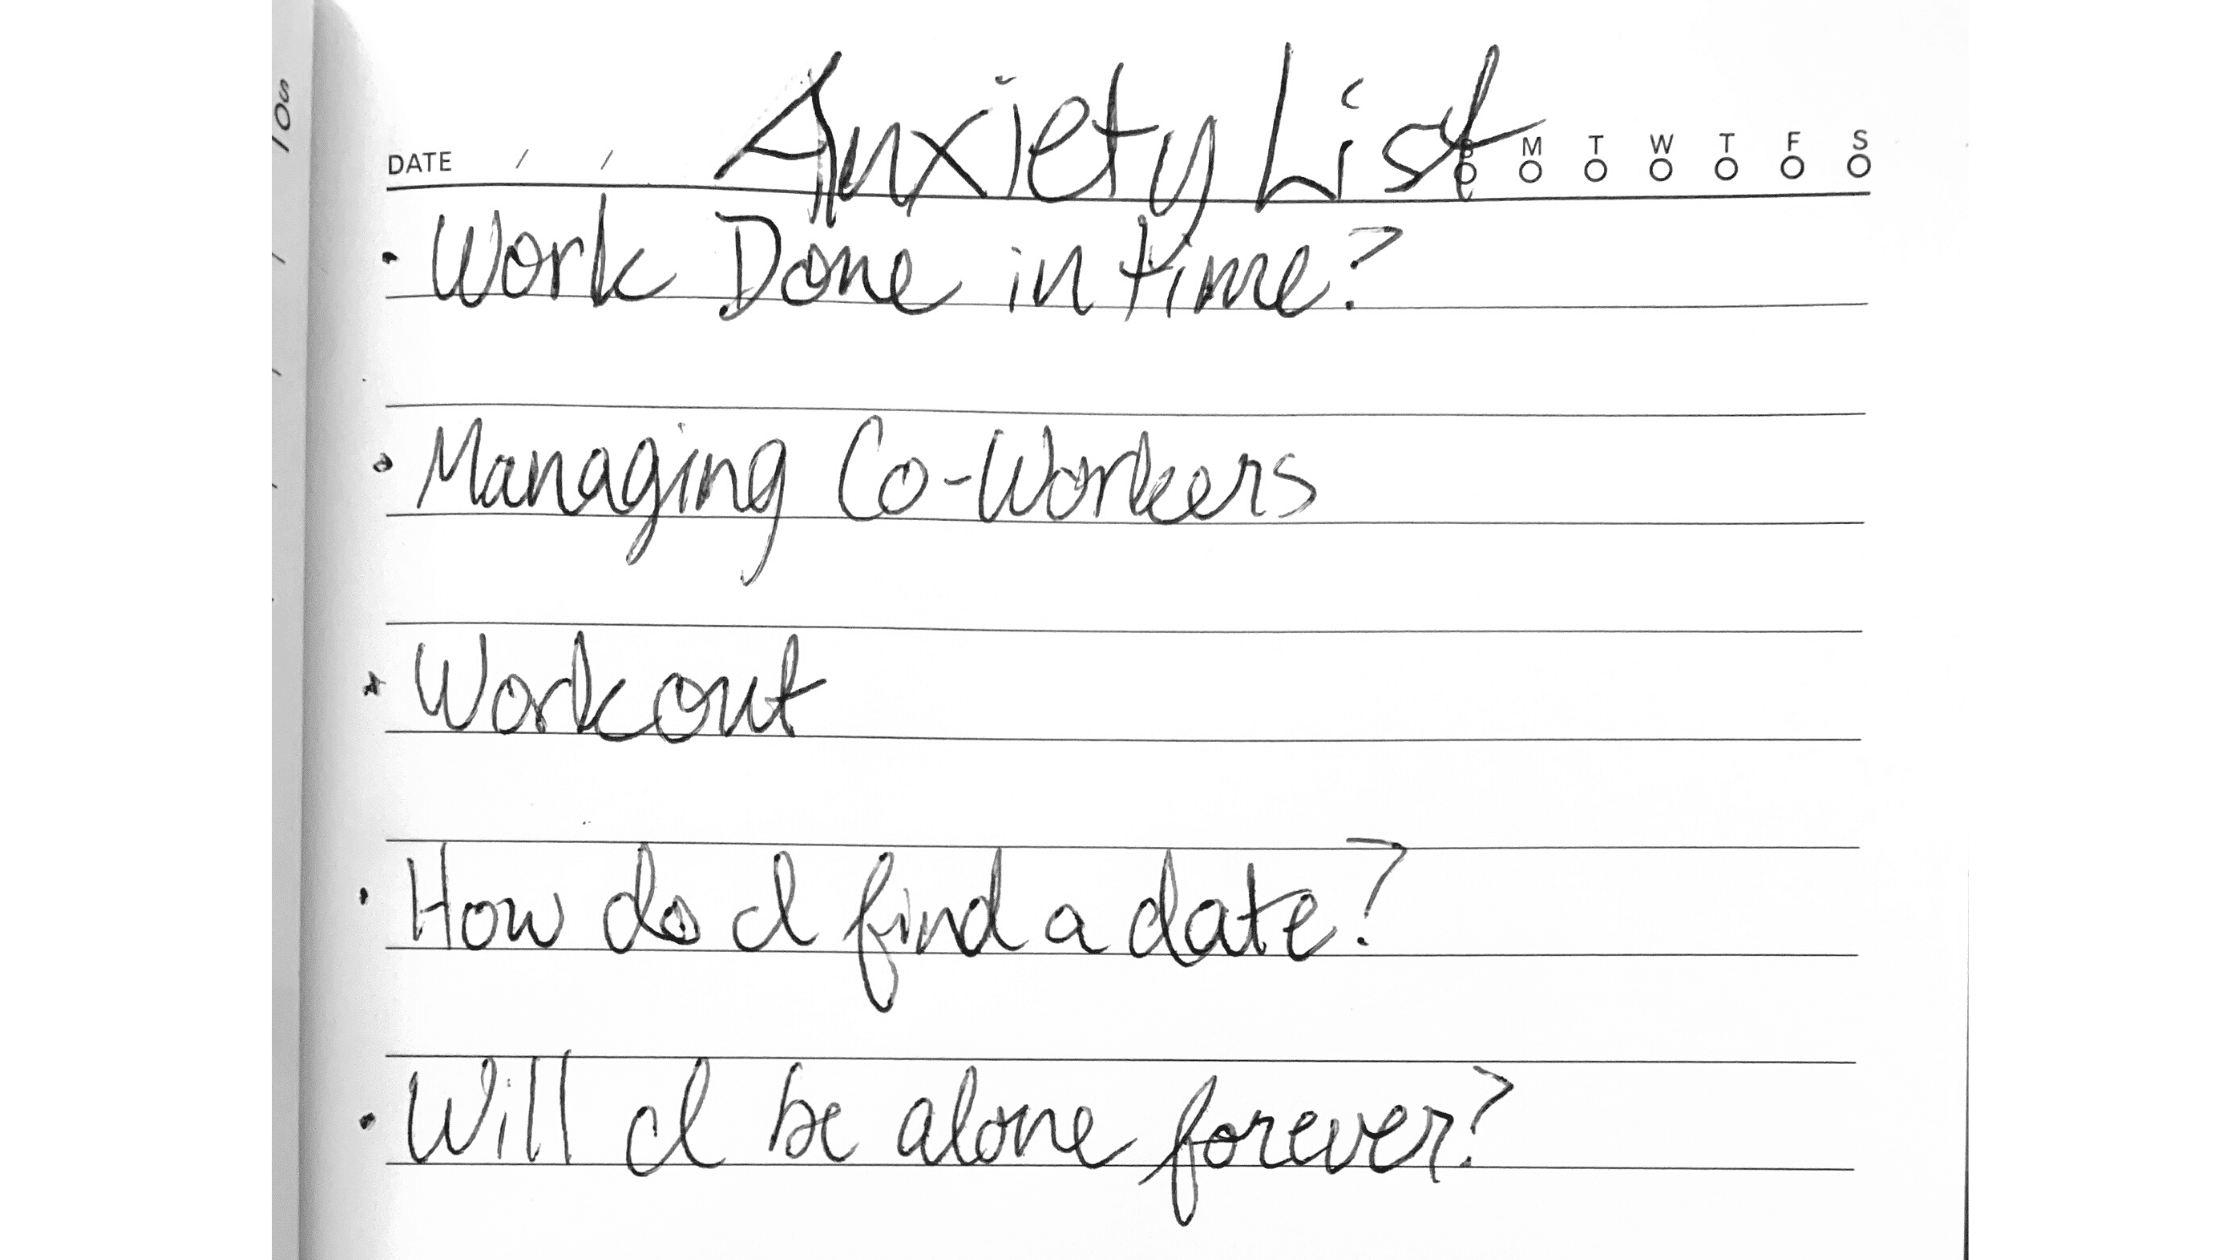 Putting together a list for helping with anxiety.